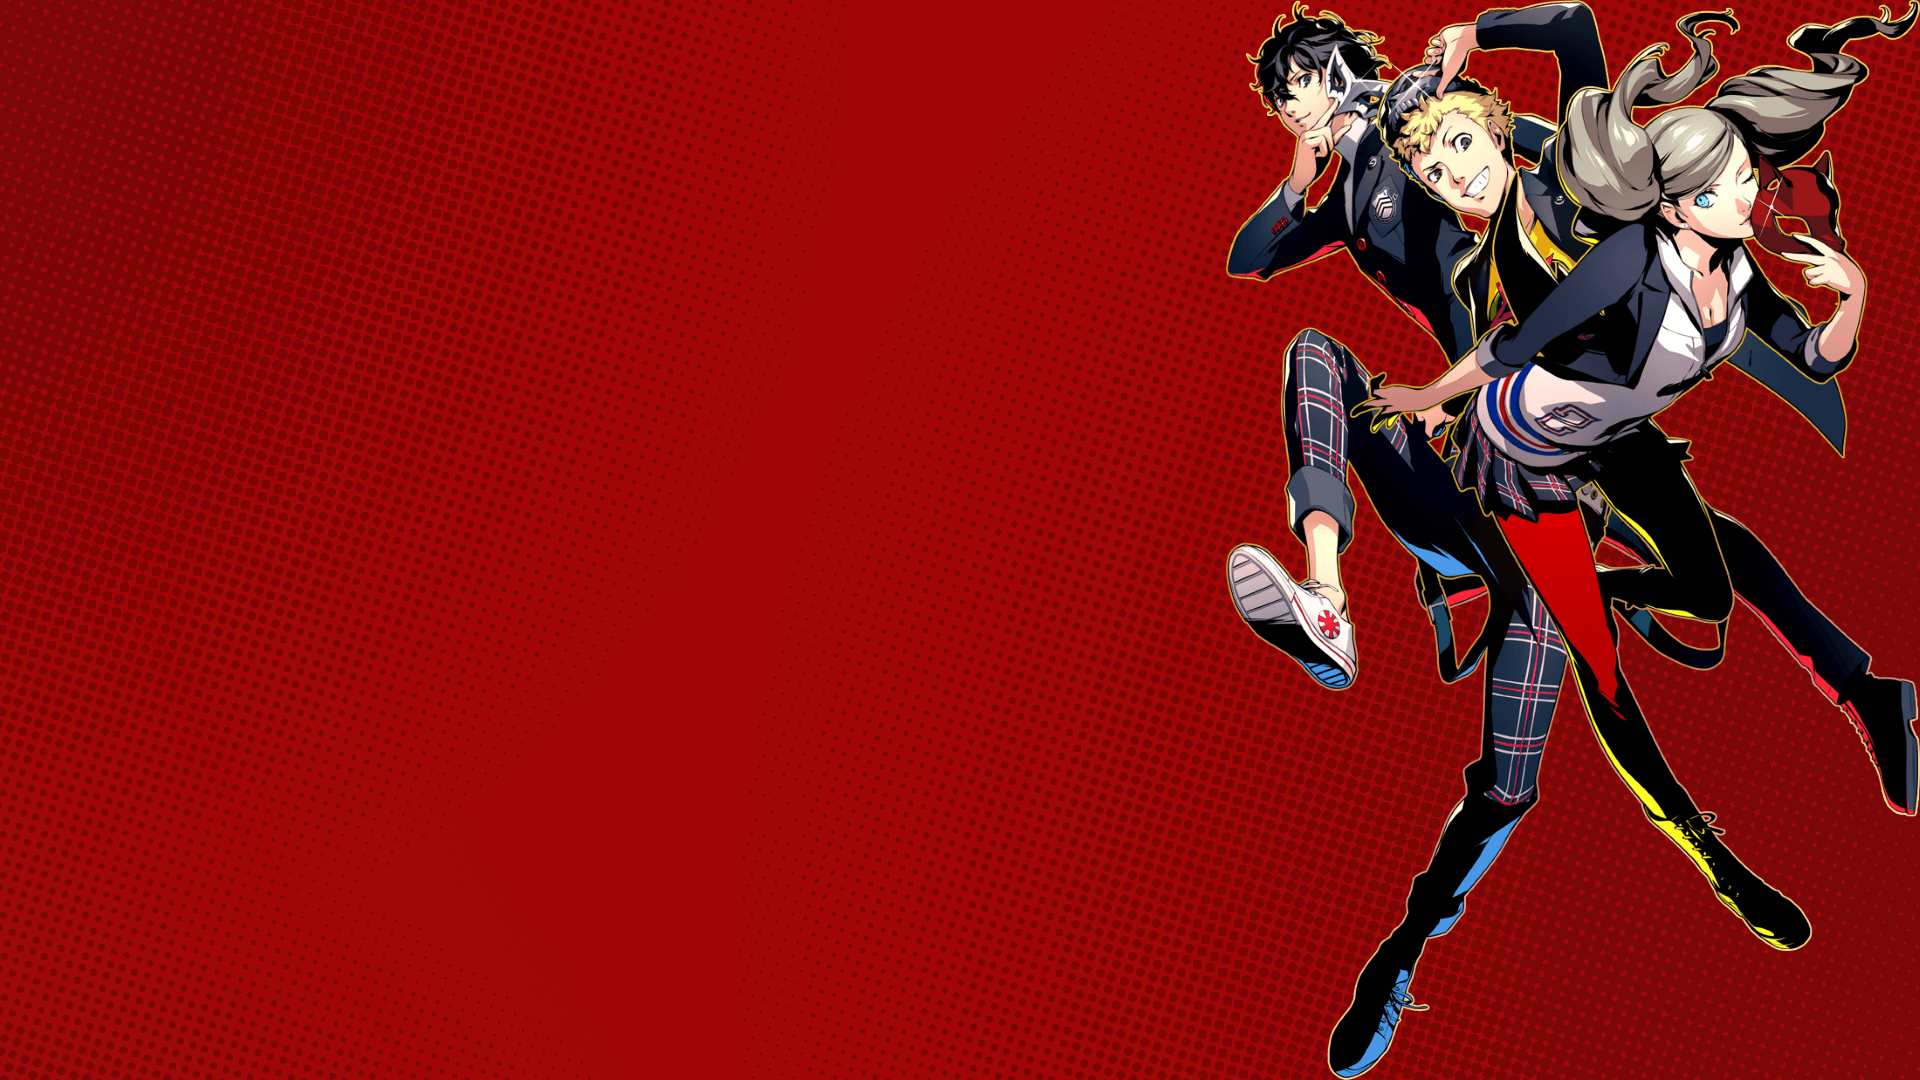 I made some wallpaper from the character art for P5R, if